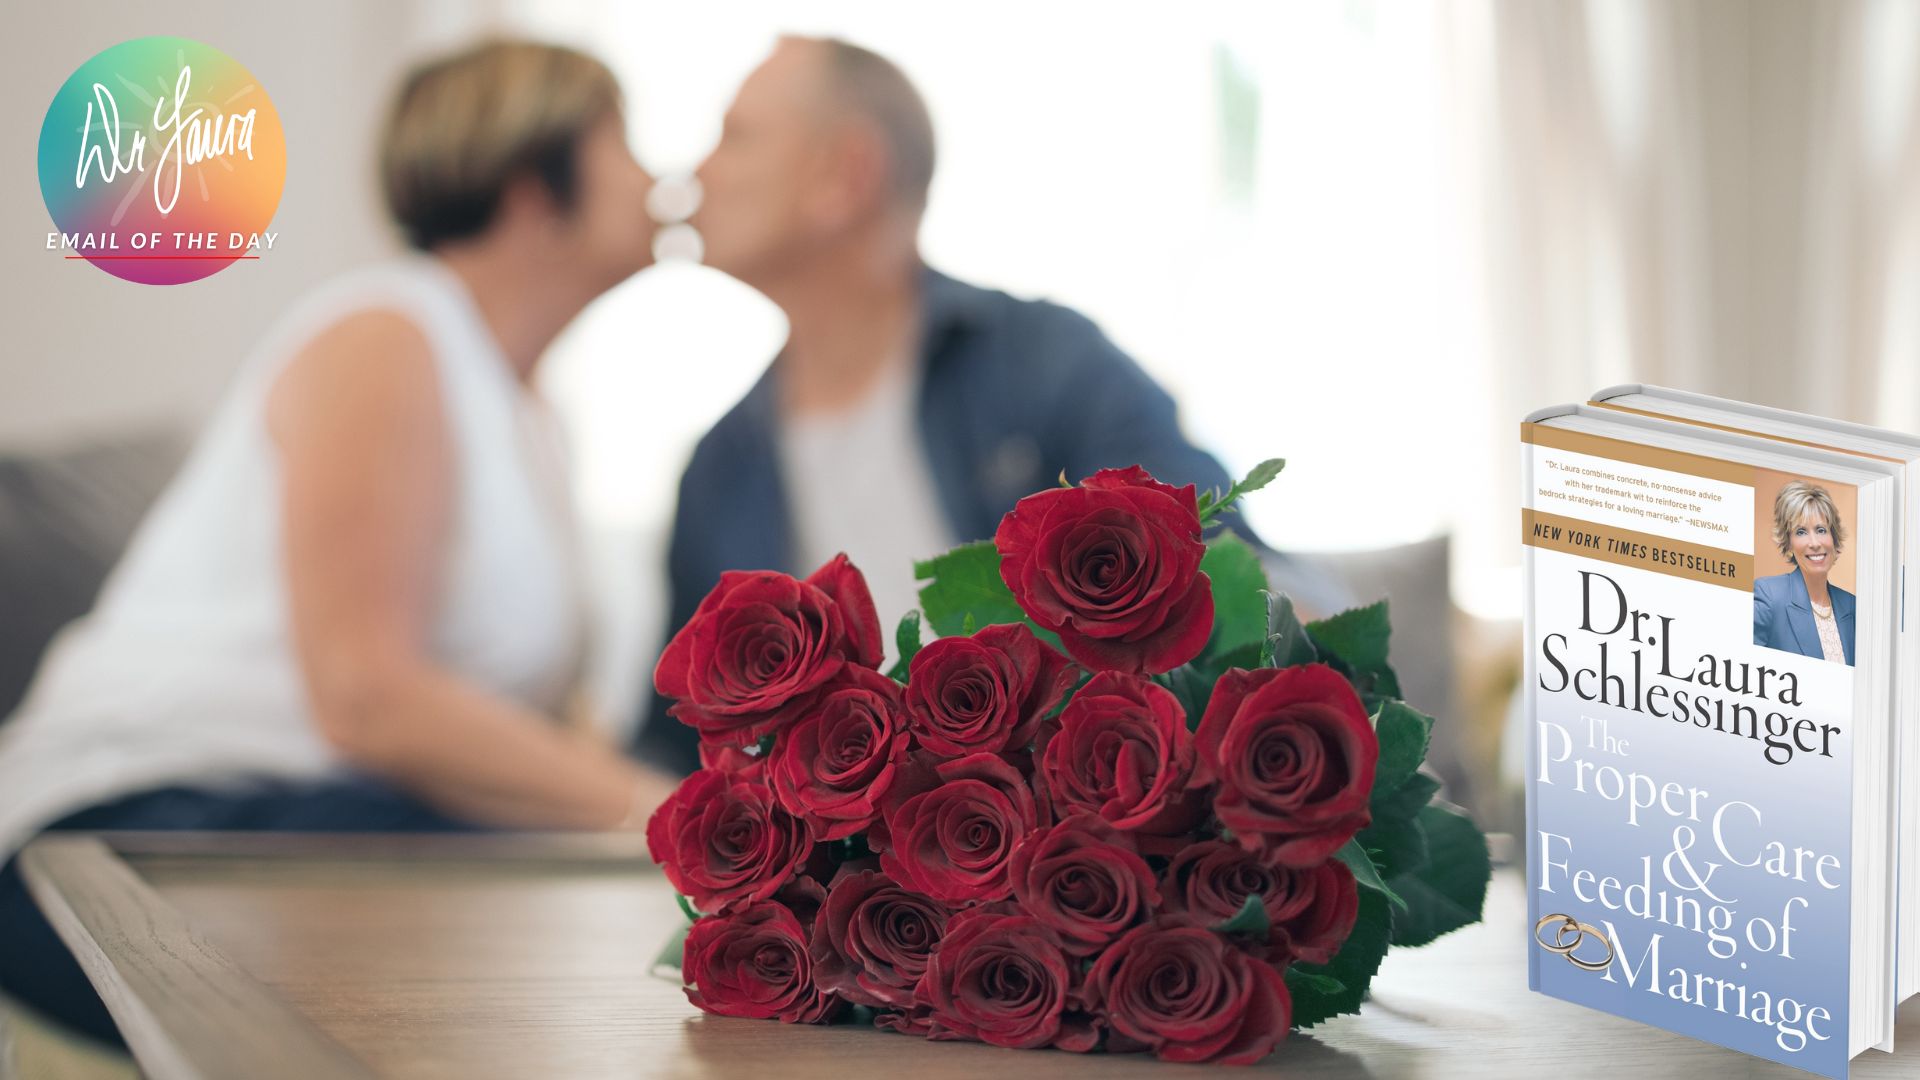 Bouquet of roses sits on table while out-of-focus man and woman in the background kiss